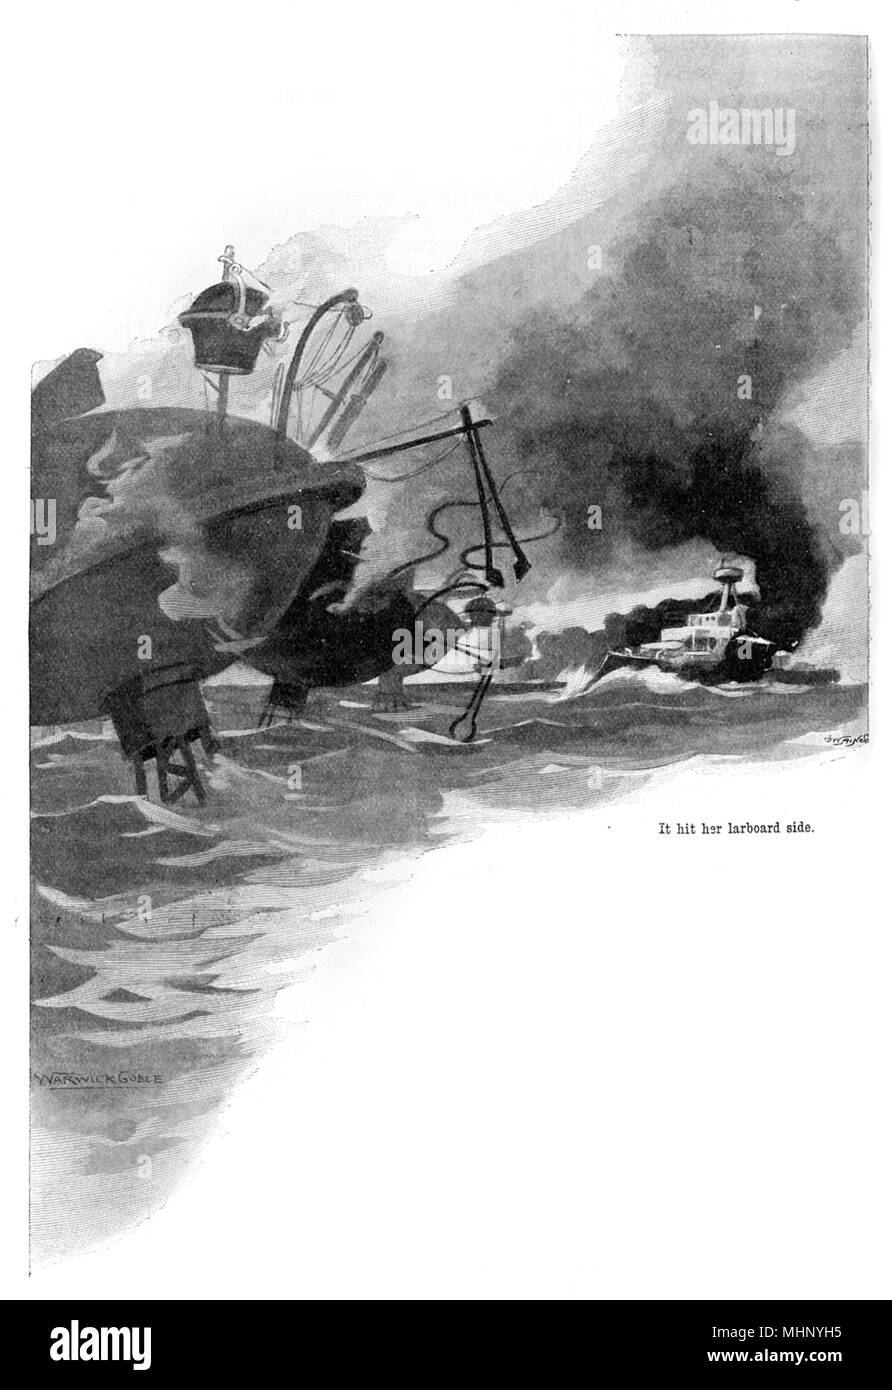 A Martina fighting machine discharges a canister of black gas which hit the Ironclad warship on the larboard (port) side. The War of the Worlds is a science fiction novel by English author H. G. Wells (1866-1946). This plate comes from the first serialised version, published in 1897 by Pearson's Magazine in the UK.     Date: 1897 Stock Photo